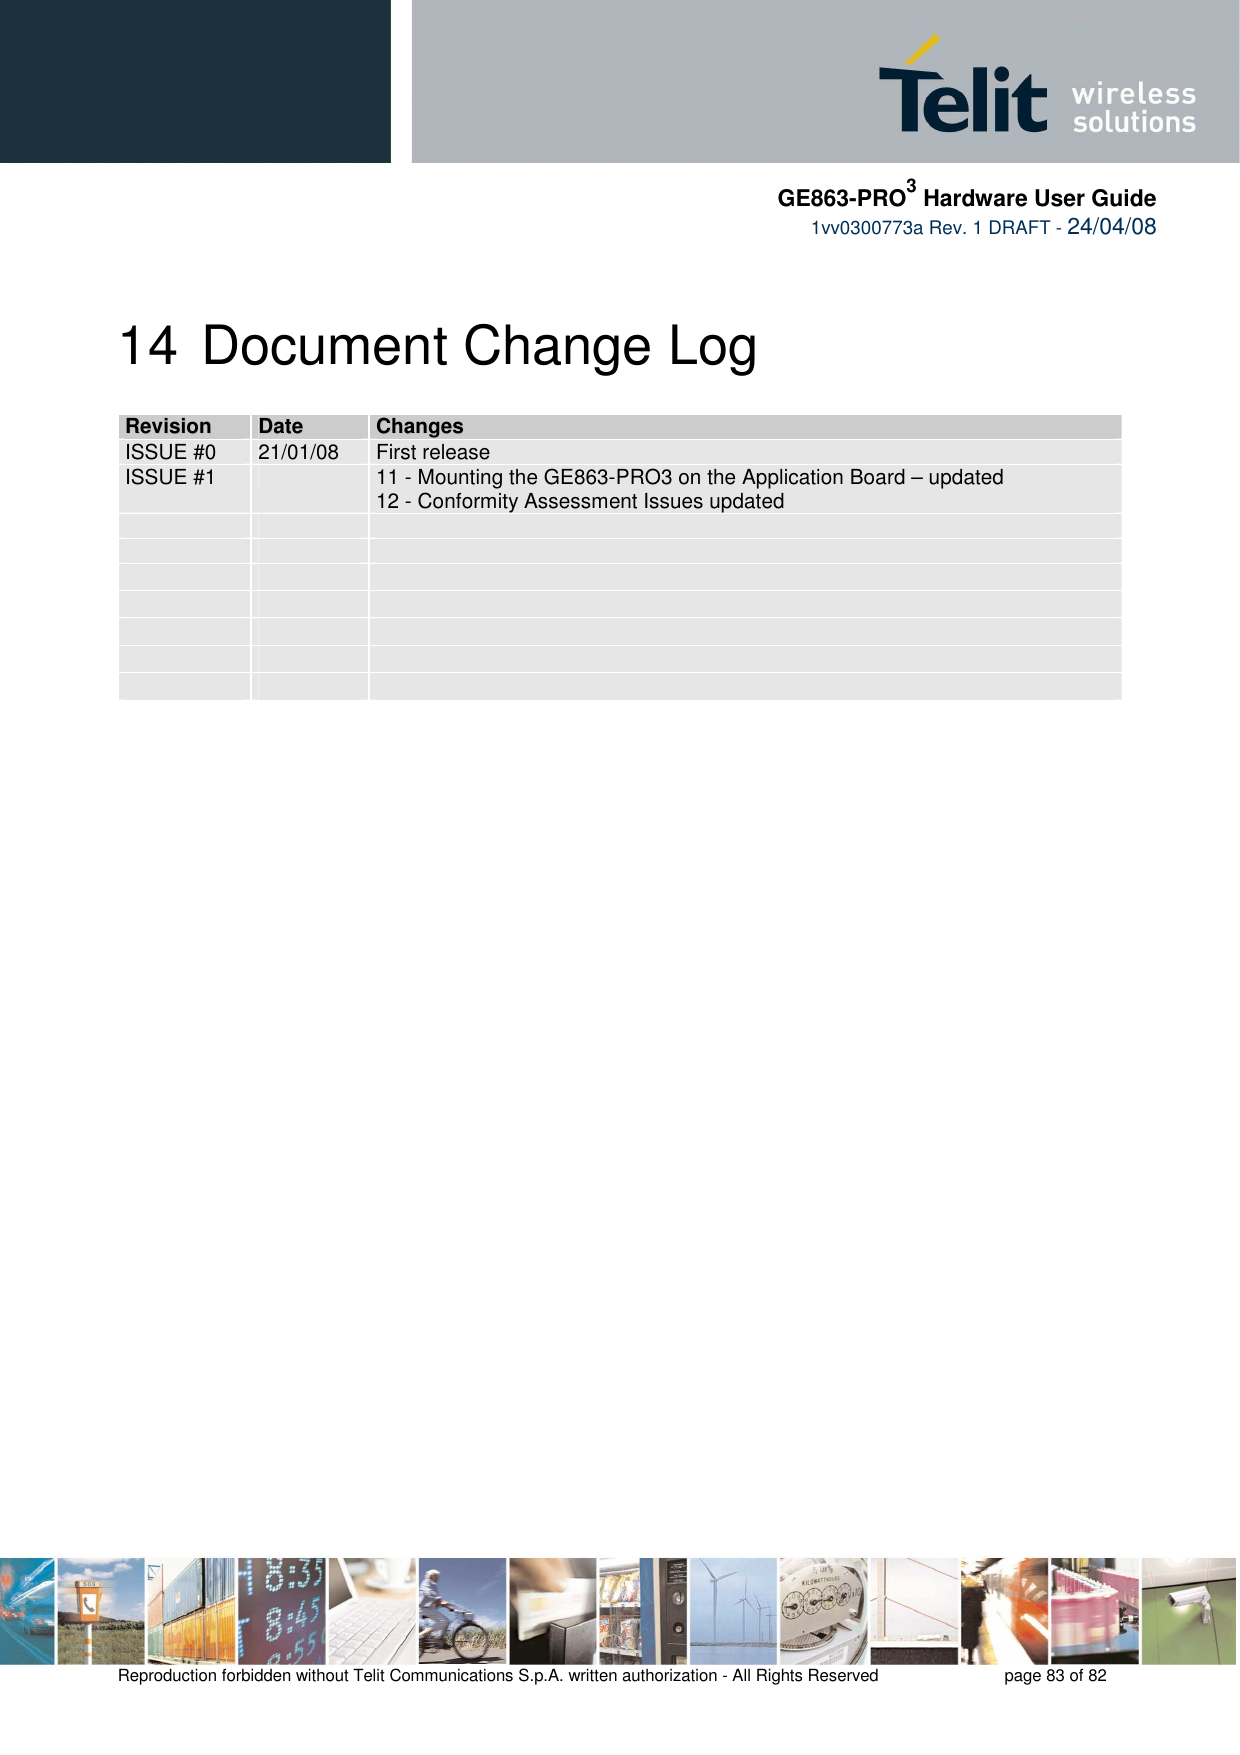     GE863-PRO3 Hardware User Guide  1vv0300773a Rev. 1 DRAFT - 24/04/08    Reproduction forbidden without Telit Communications S.p.A. written authorization - All Rights Reserved    page 83 of 82  14 Document Change Log RReevviissiioonn  DDaattee  CChhaannggeess  ISSUE #0  21/01/08  First release ISSUE #1    11 - Mounting the GE863-PRO3 on the Application Board – updated 12 - Conformity Assessment Issues updated                                      